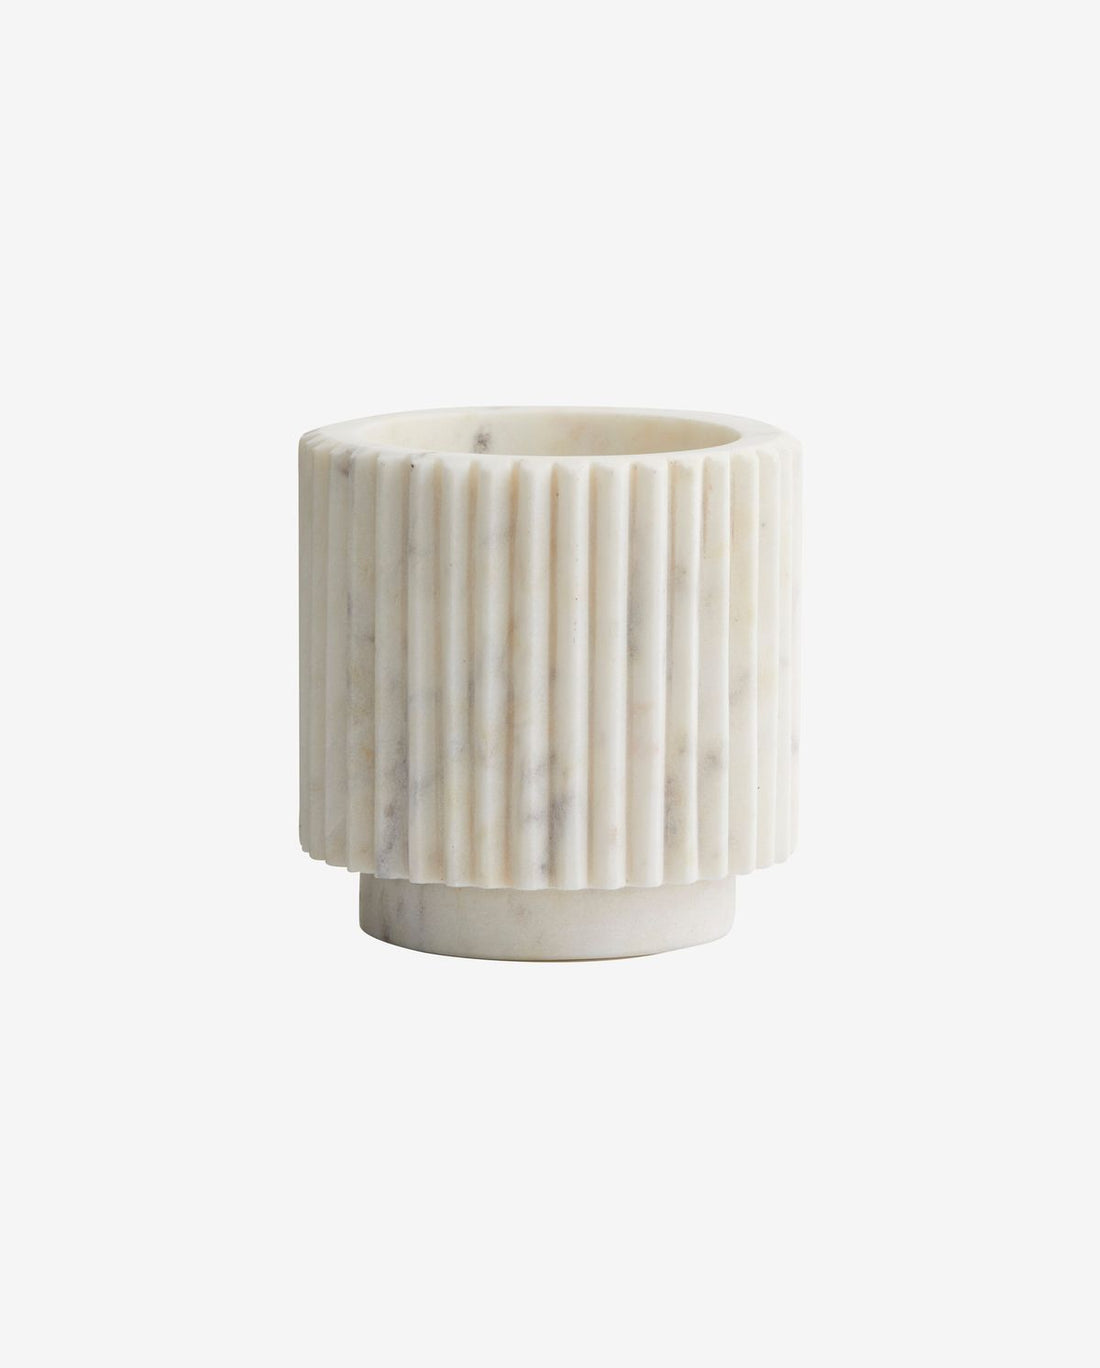 Nordal A/S Loon Pot, White Marble